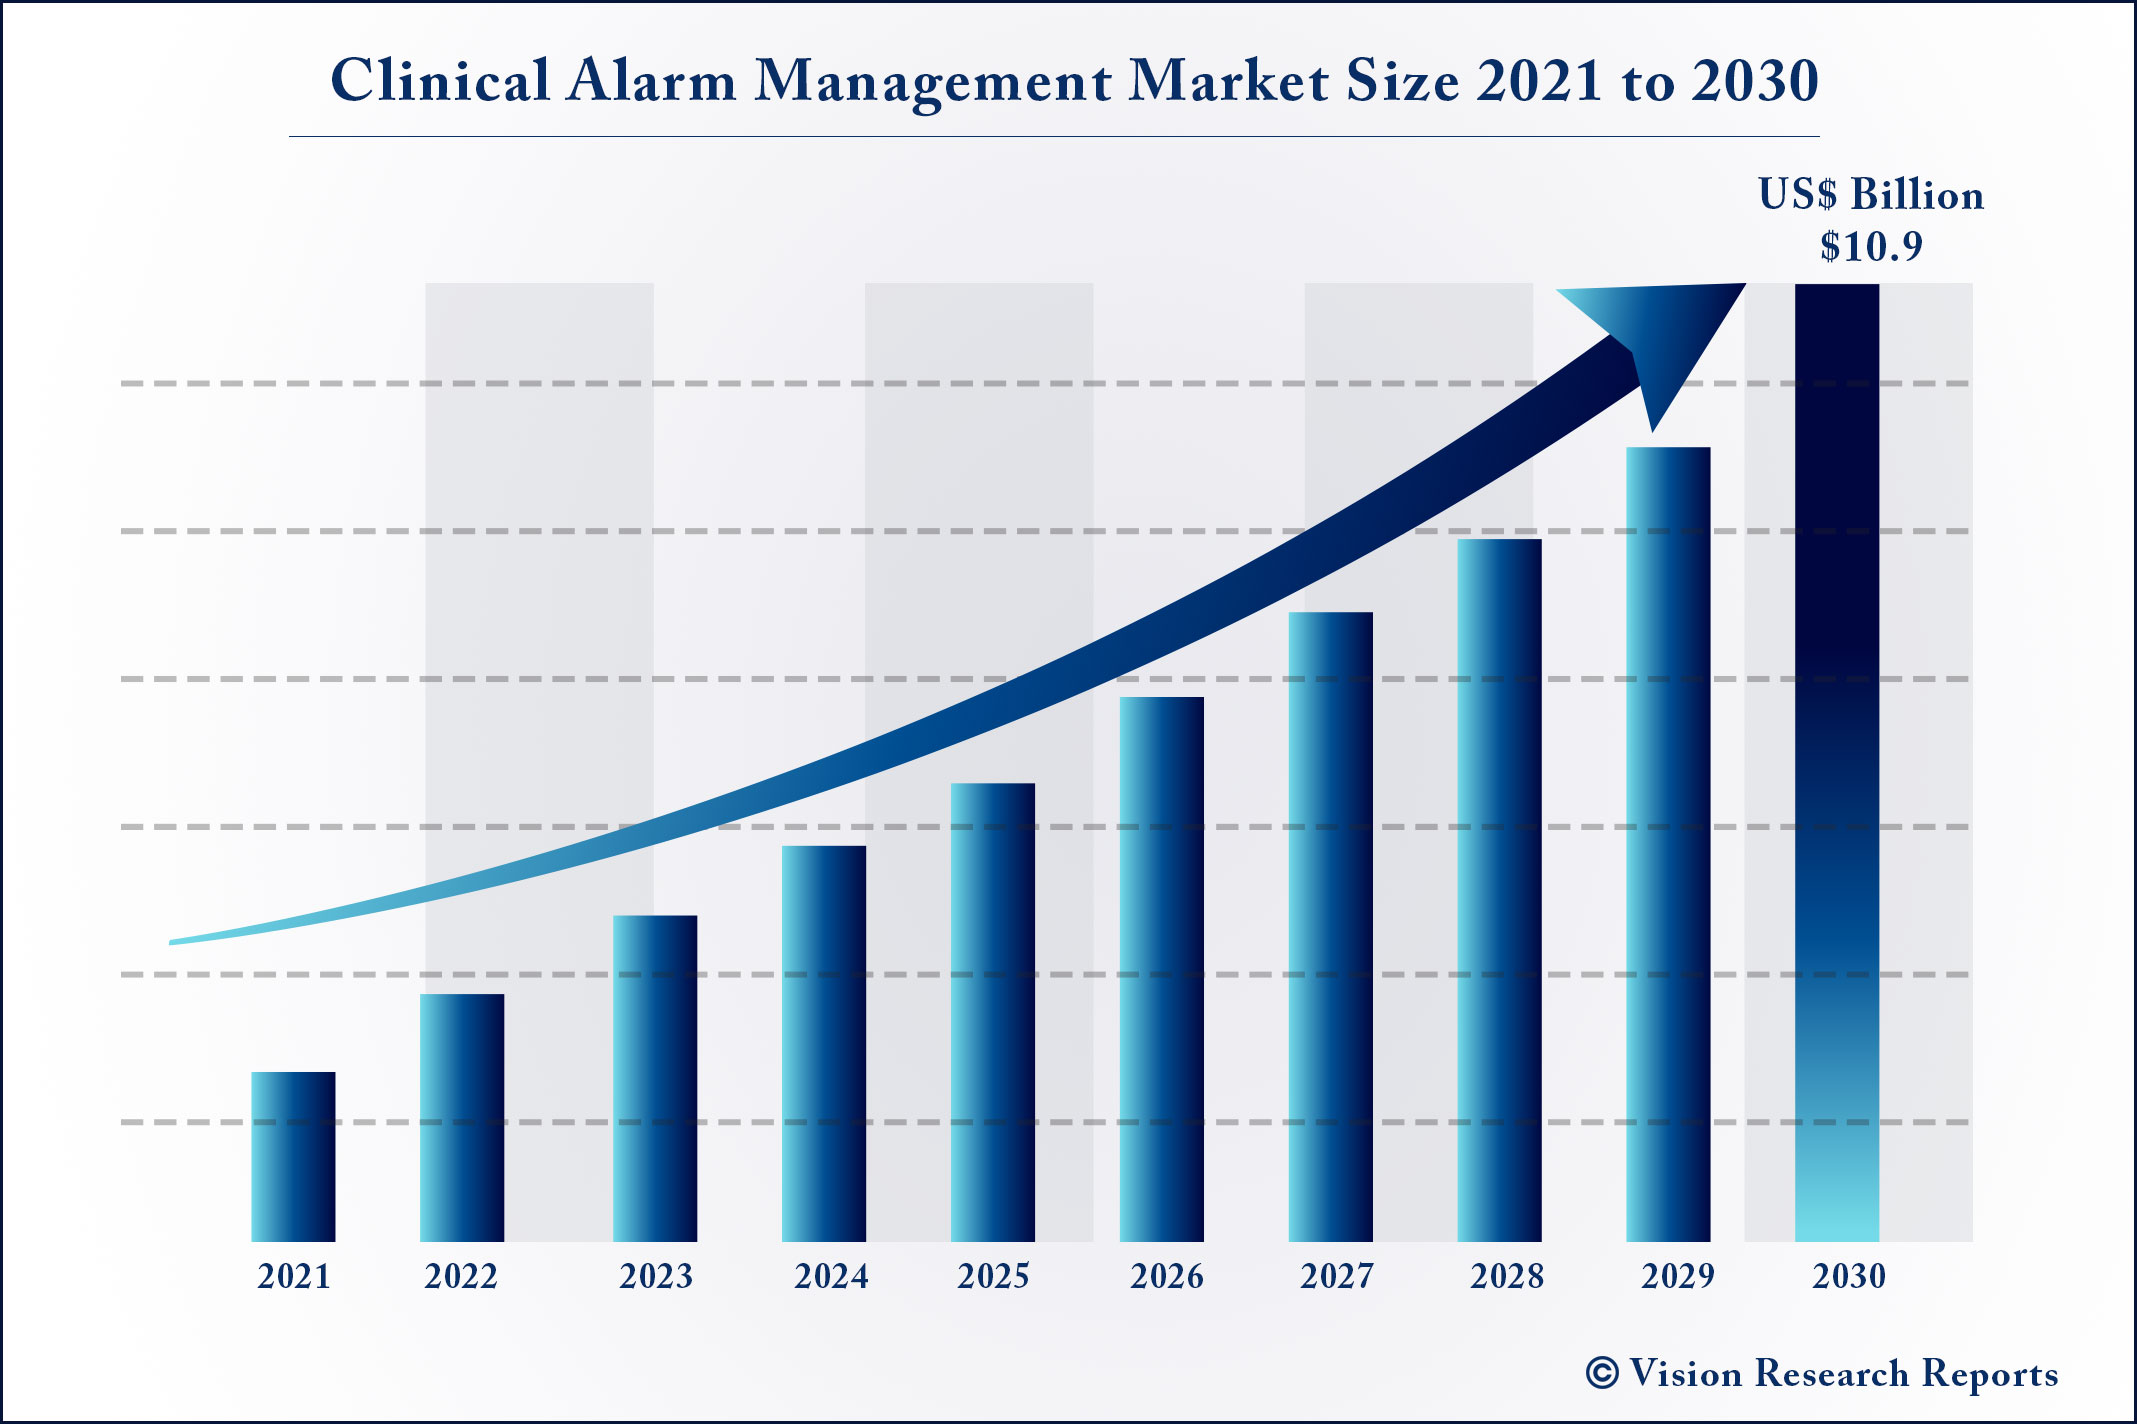 Clinical Alarm Management Market Size 2021 to 2030